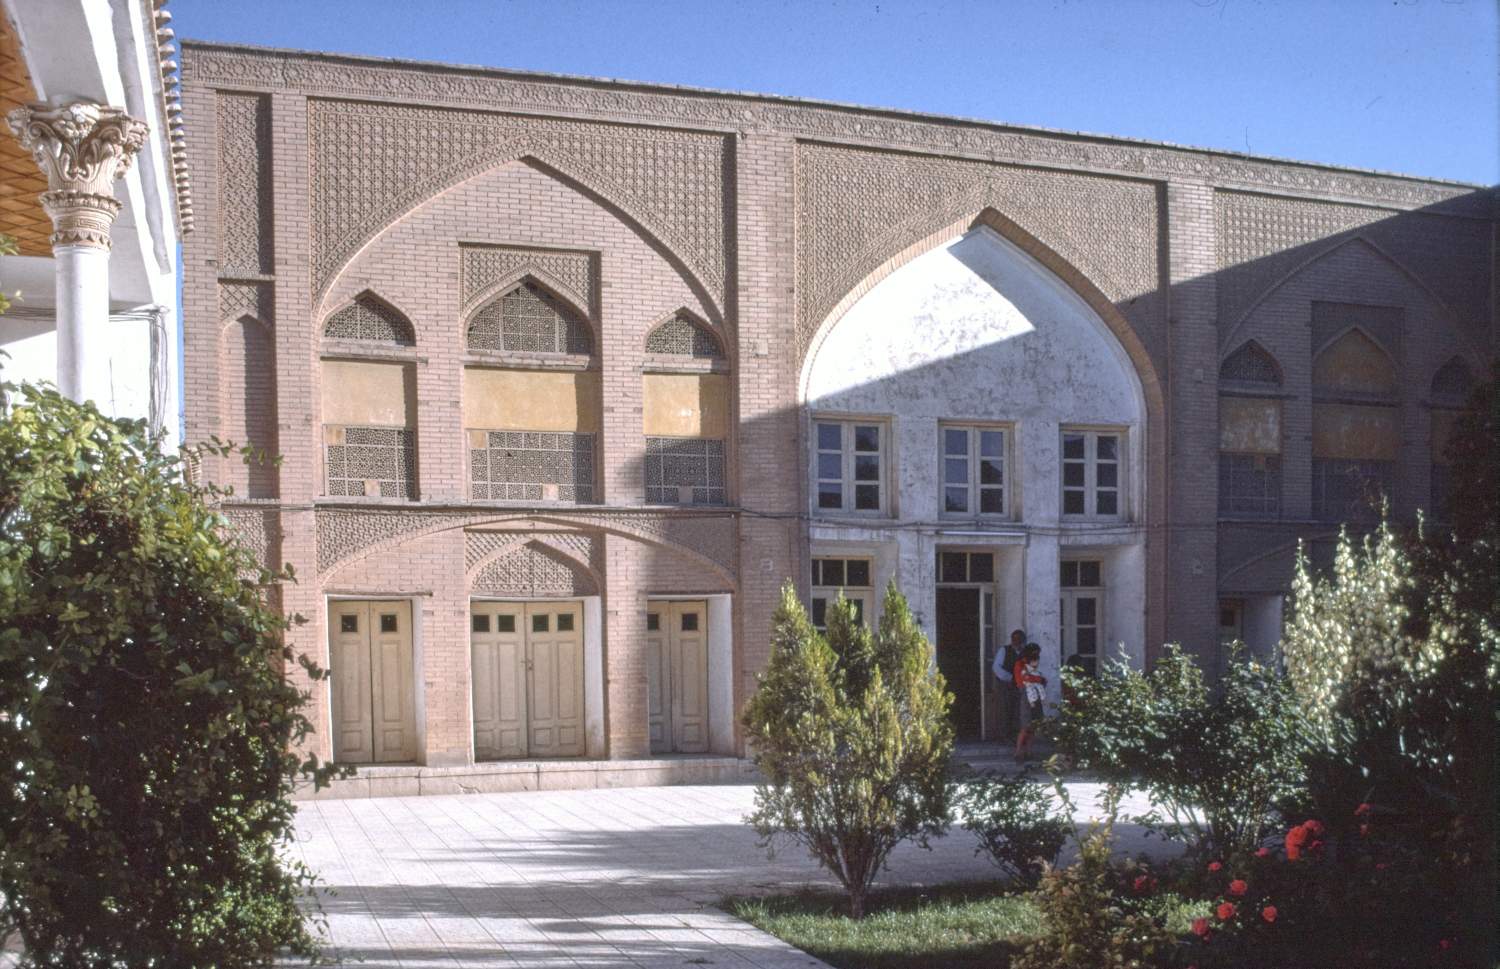 Private house in Julfa neighborhood of Isfahan, general view of facade